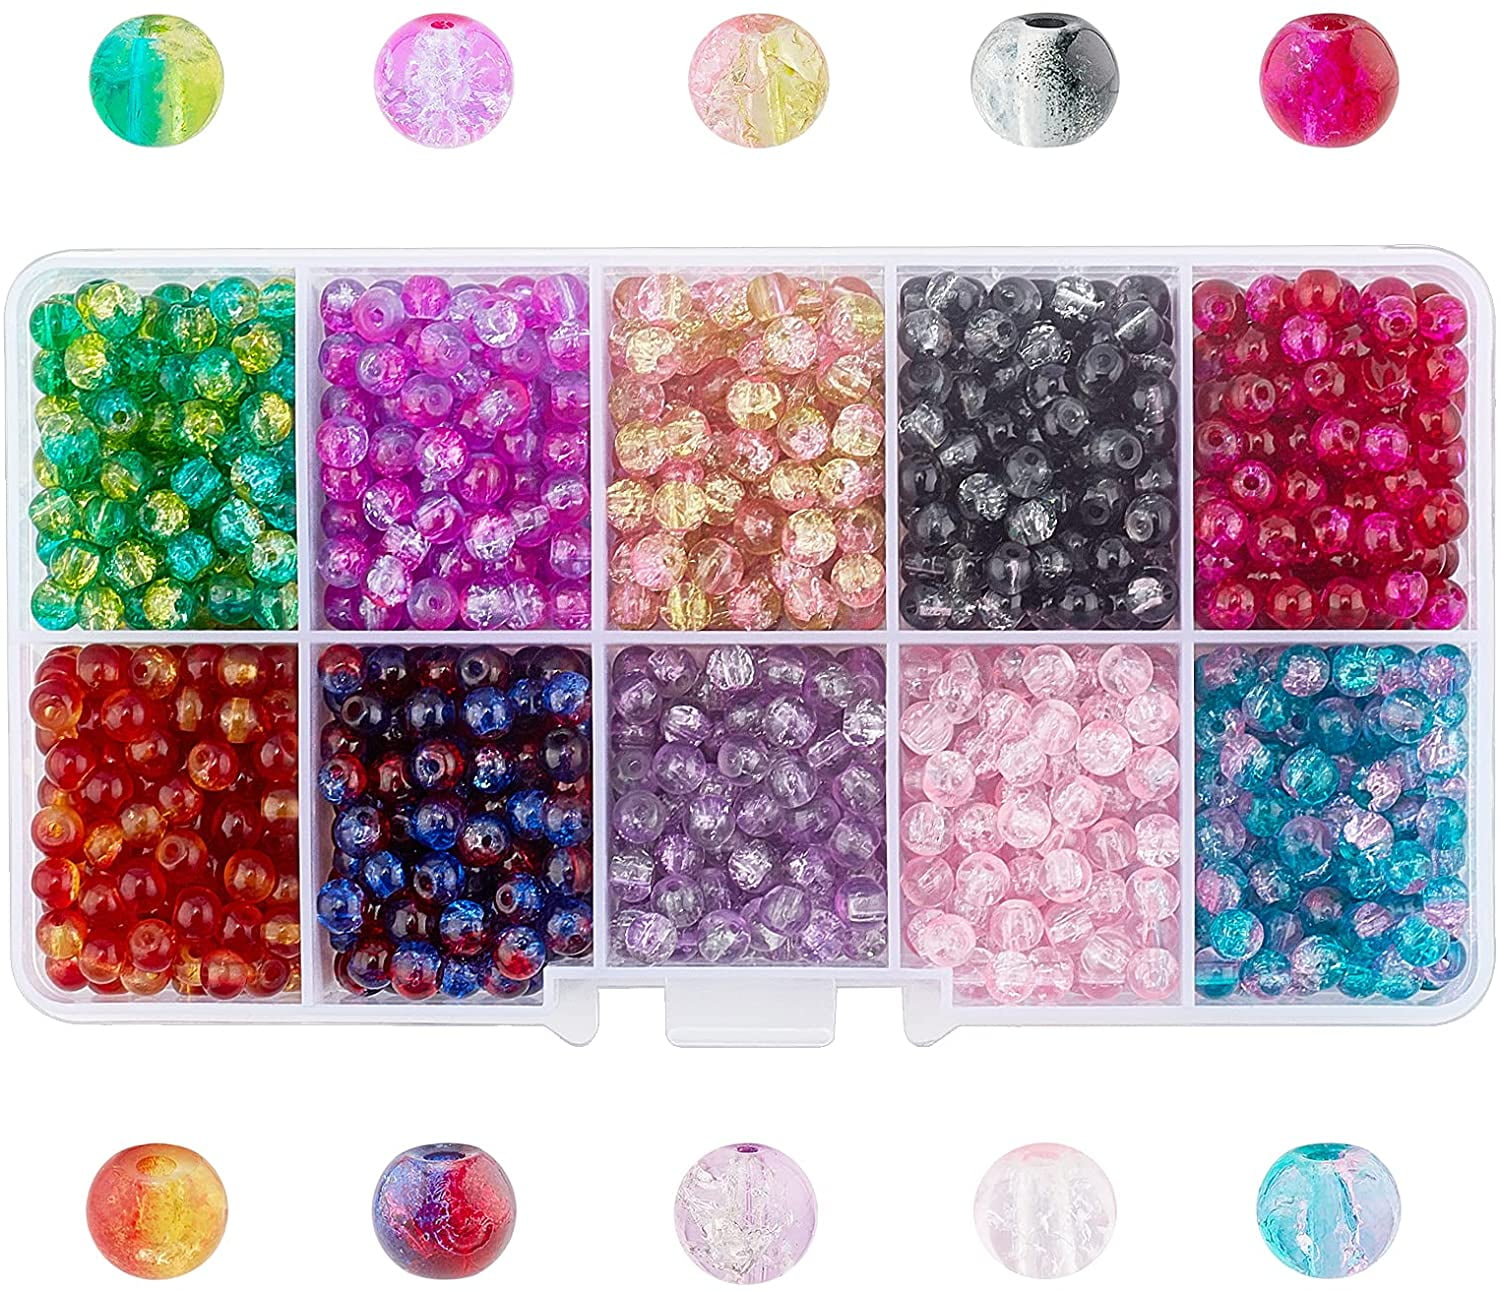 Craft Medley Glass Beads - Assorted Colors, 3.5 oz